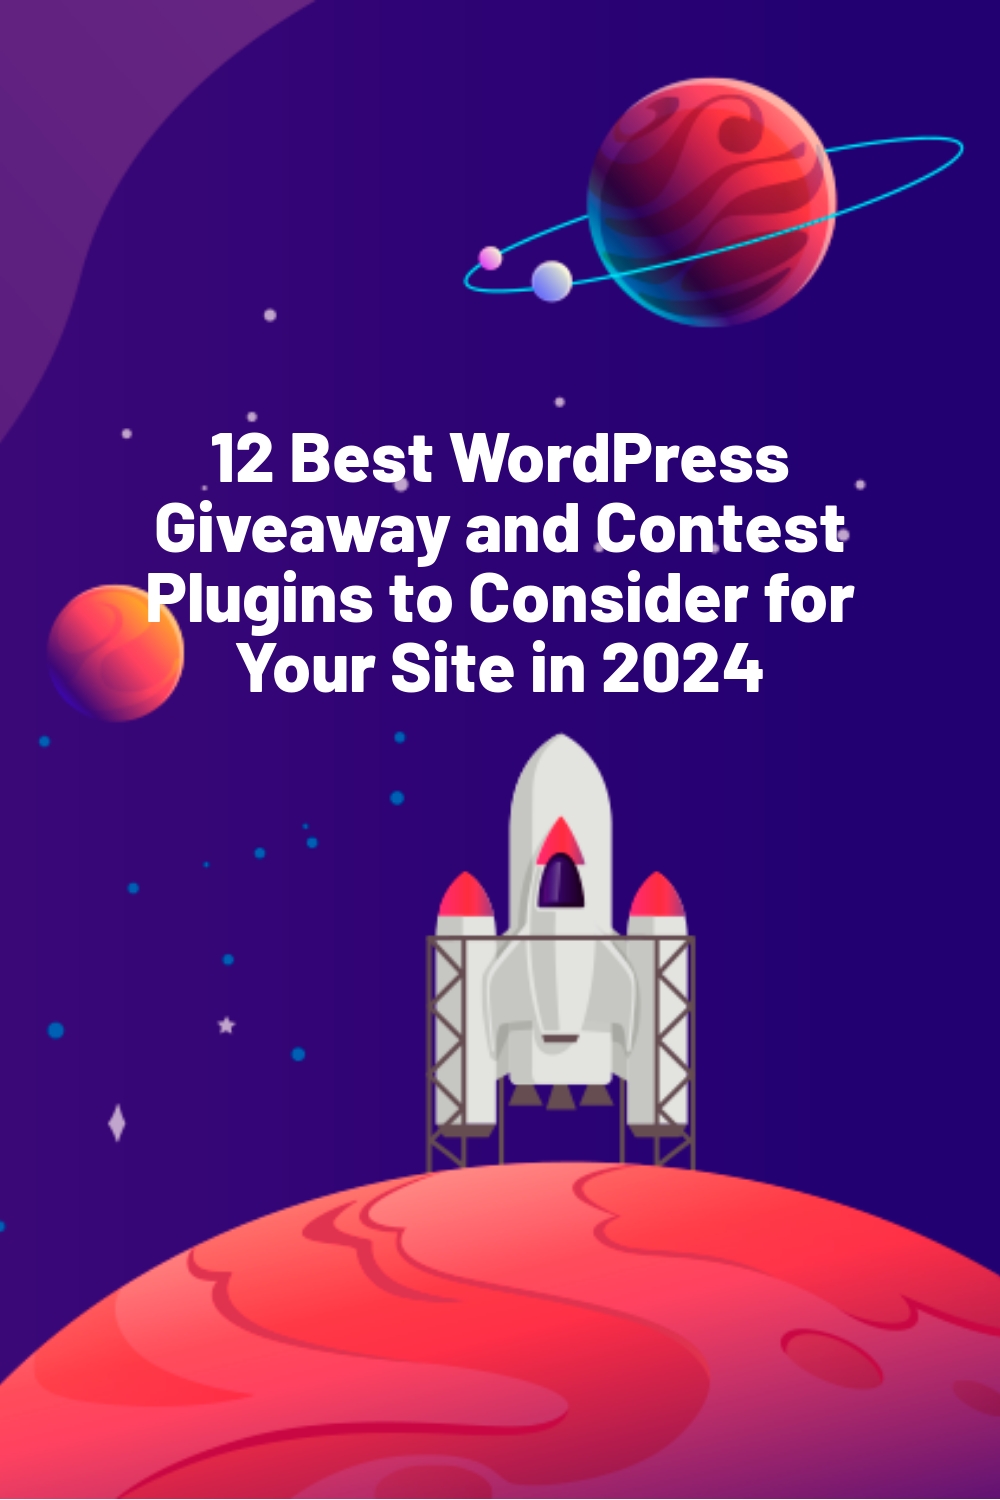 12 Best WordPress Giveaway and Contest Plugins to Consider for Your Site in 2024